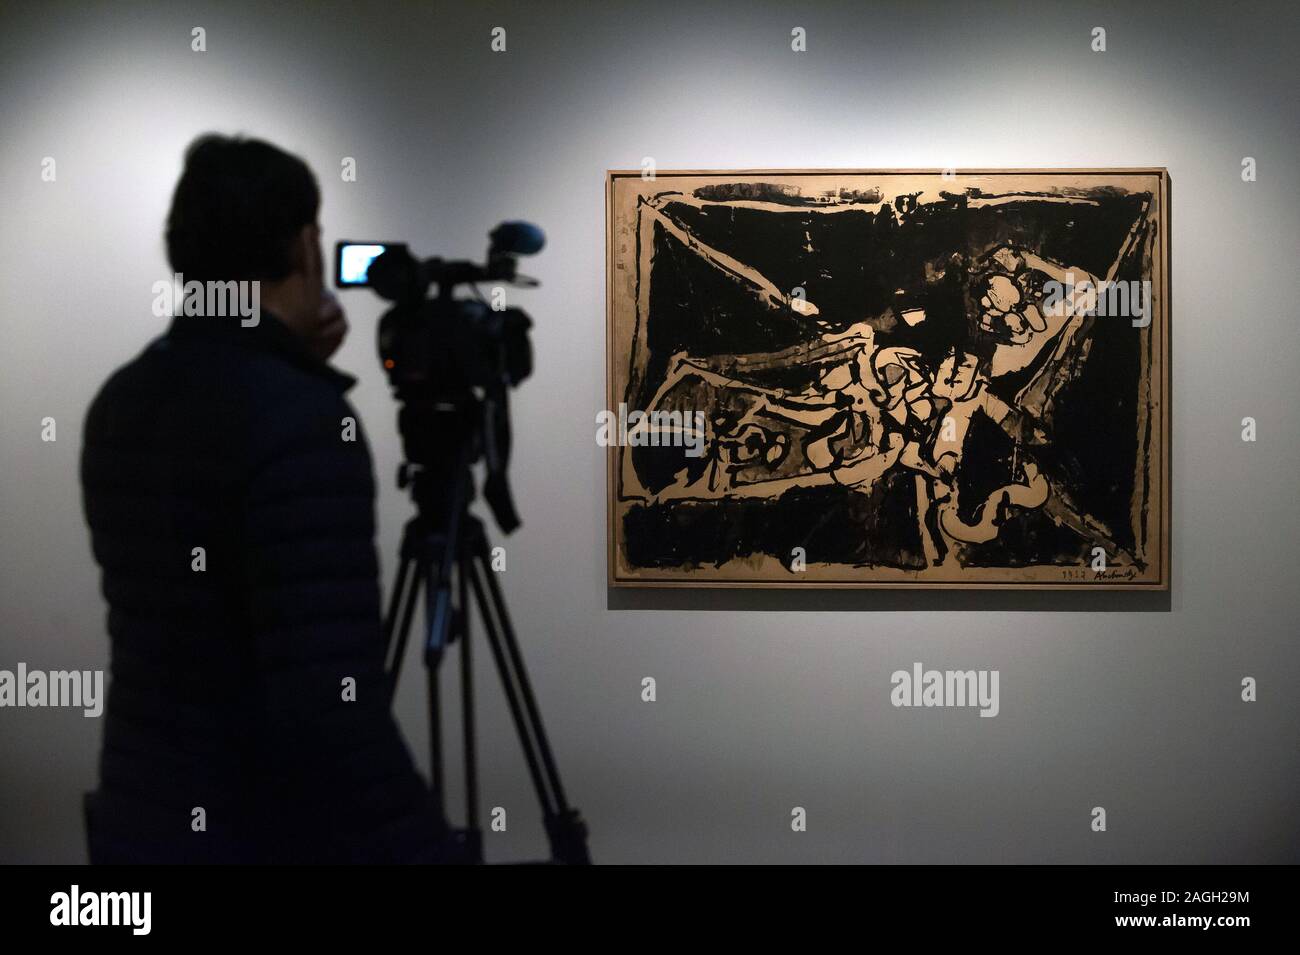 A cameraman recording images during the exhibition.'Alechinsky: en el país de la tinta' (Alechinsky in inkland) is an exhibition of paintings and drawings by Belgian artist, Pierre Alechinsky at museum Centre Pompidou. The exhibition runs from 19th Dec 2019 to 12th April 2020. Stock Photo